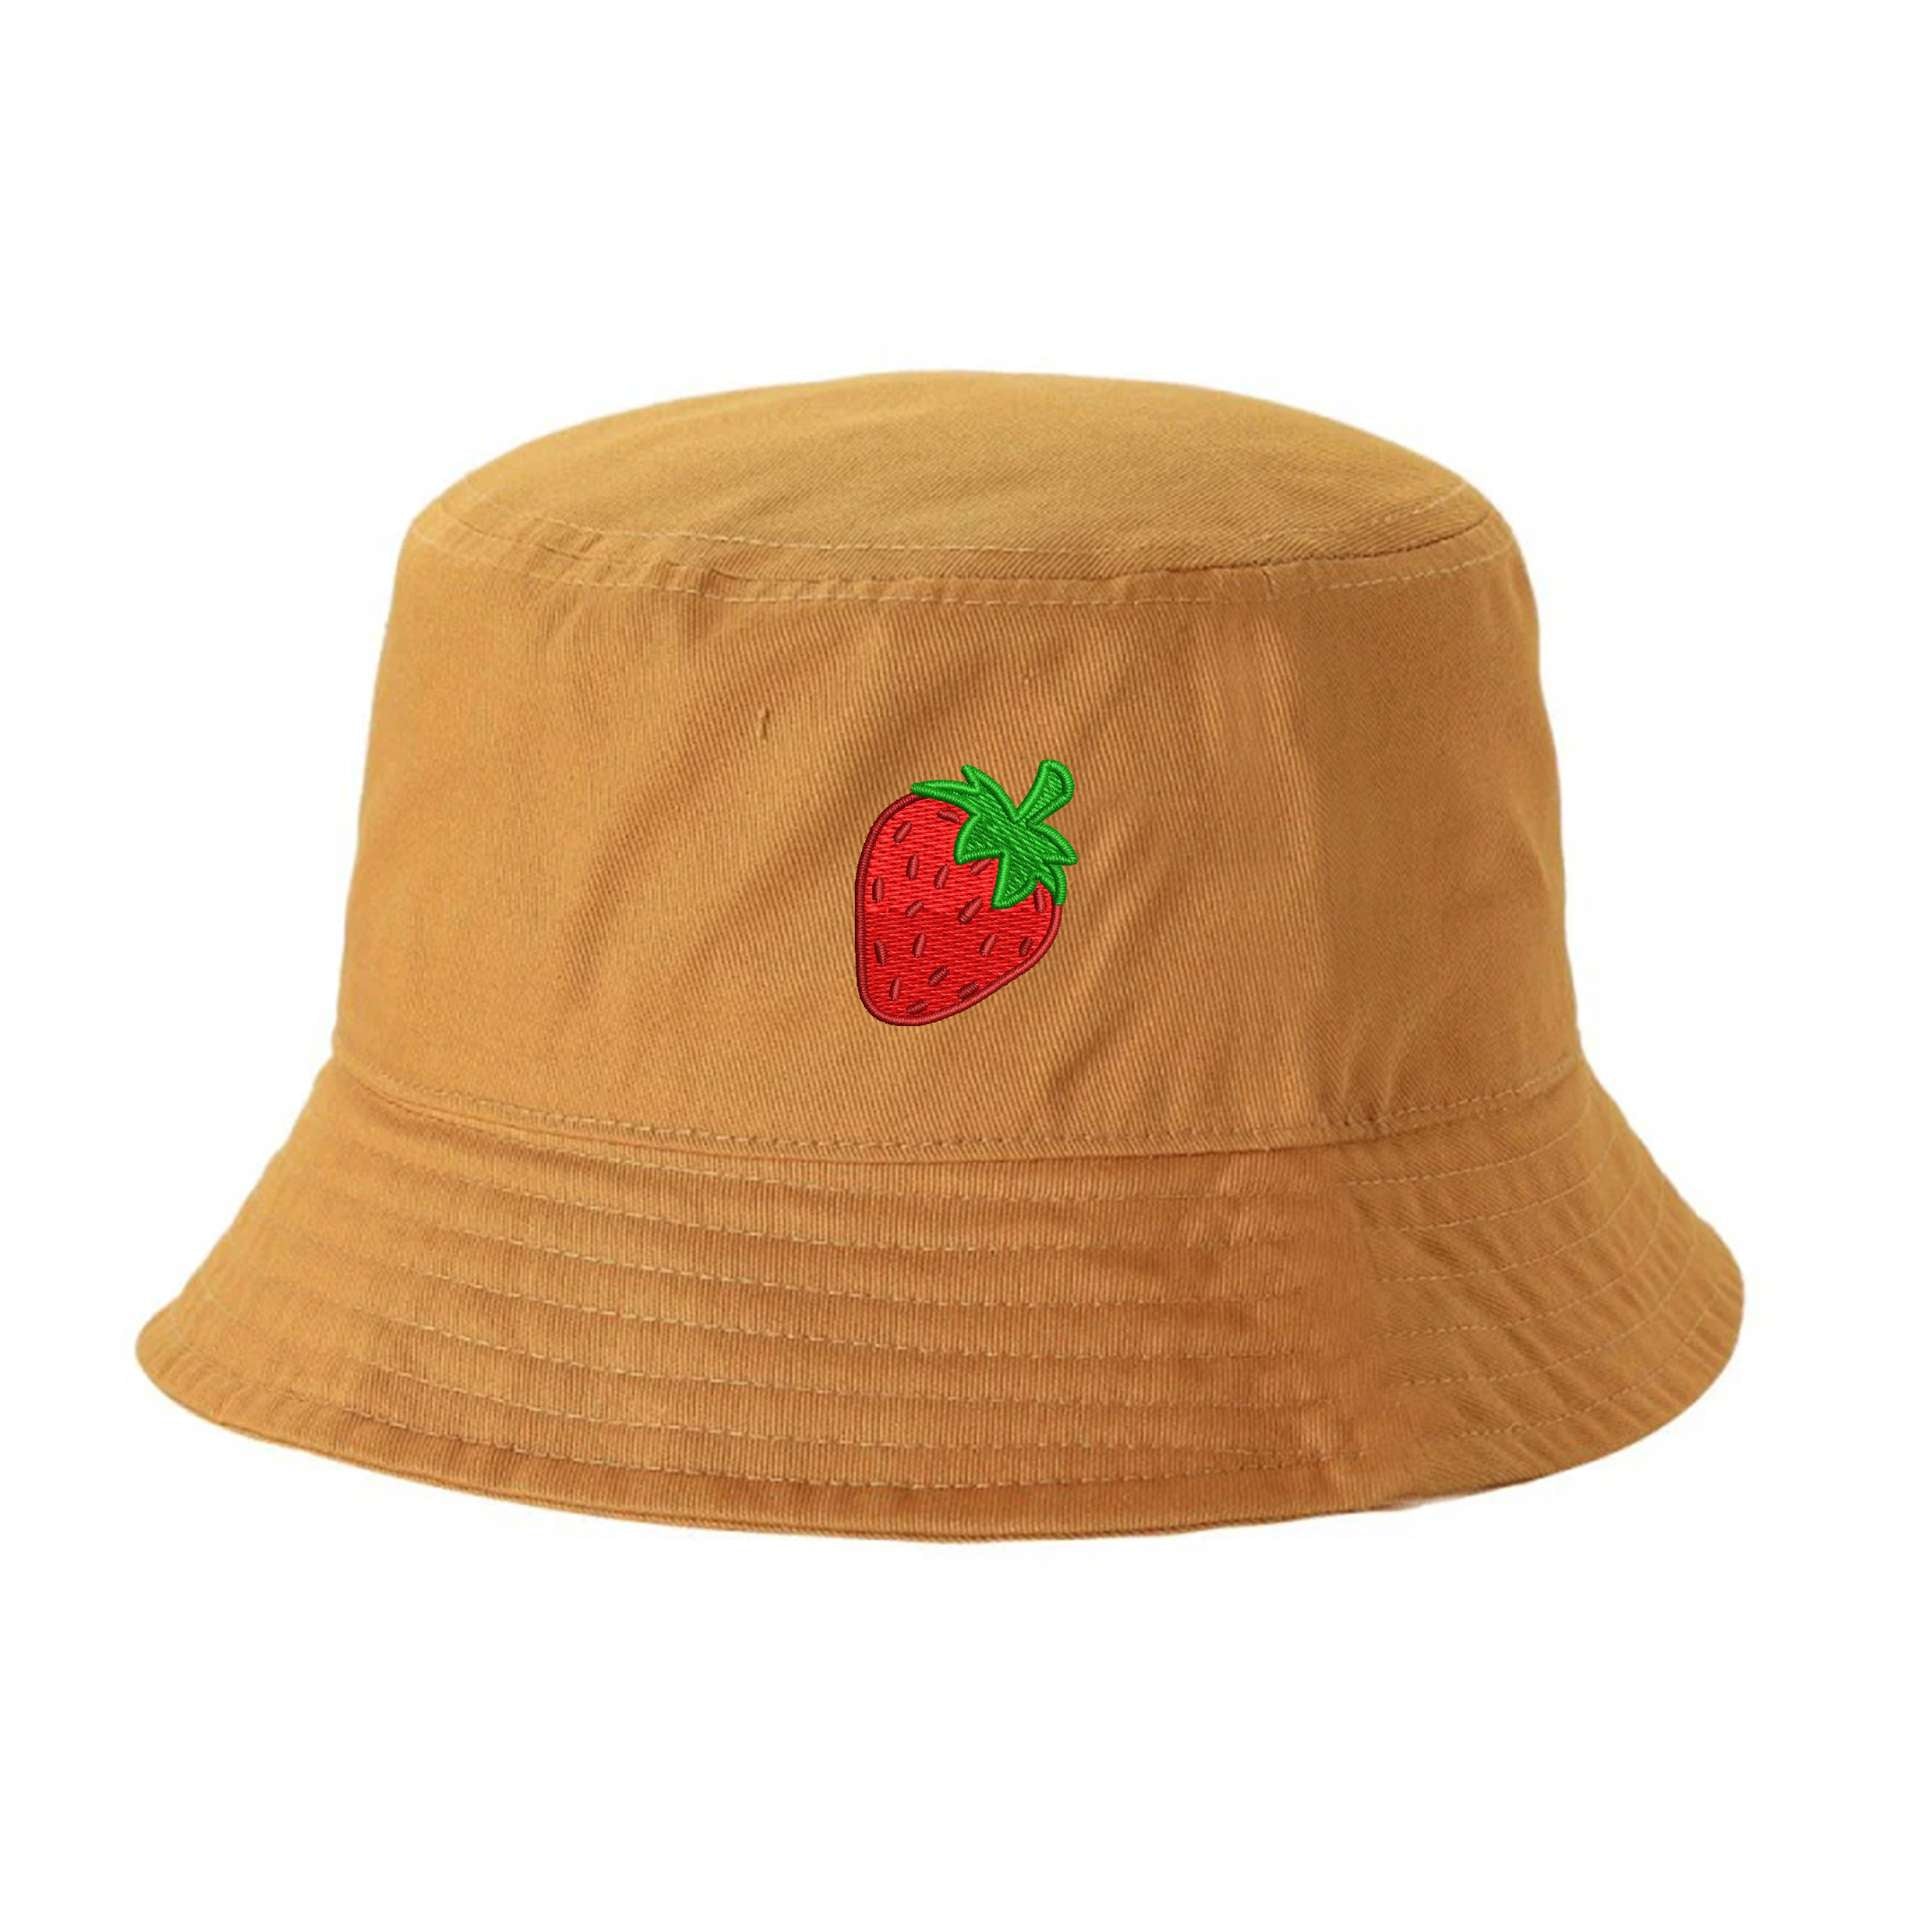 Mustard Bucket Hat embroidered with a strawberry - DSY Lifestyle